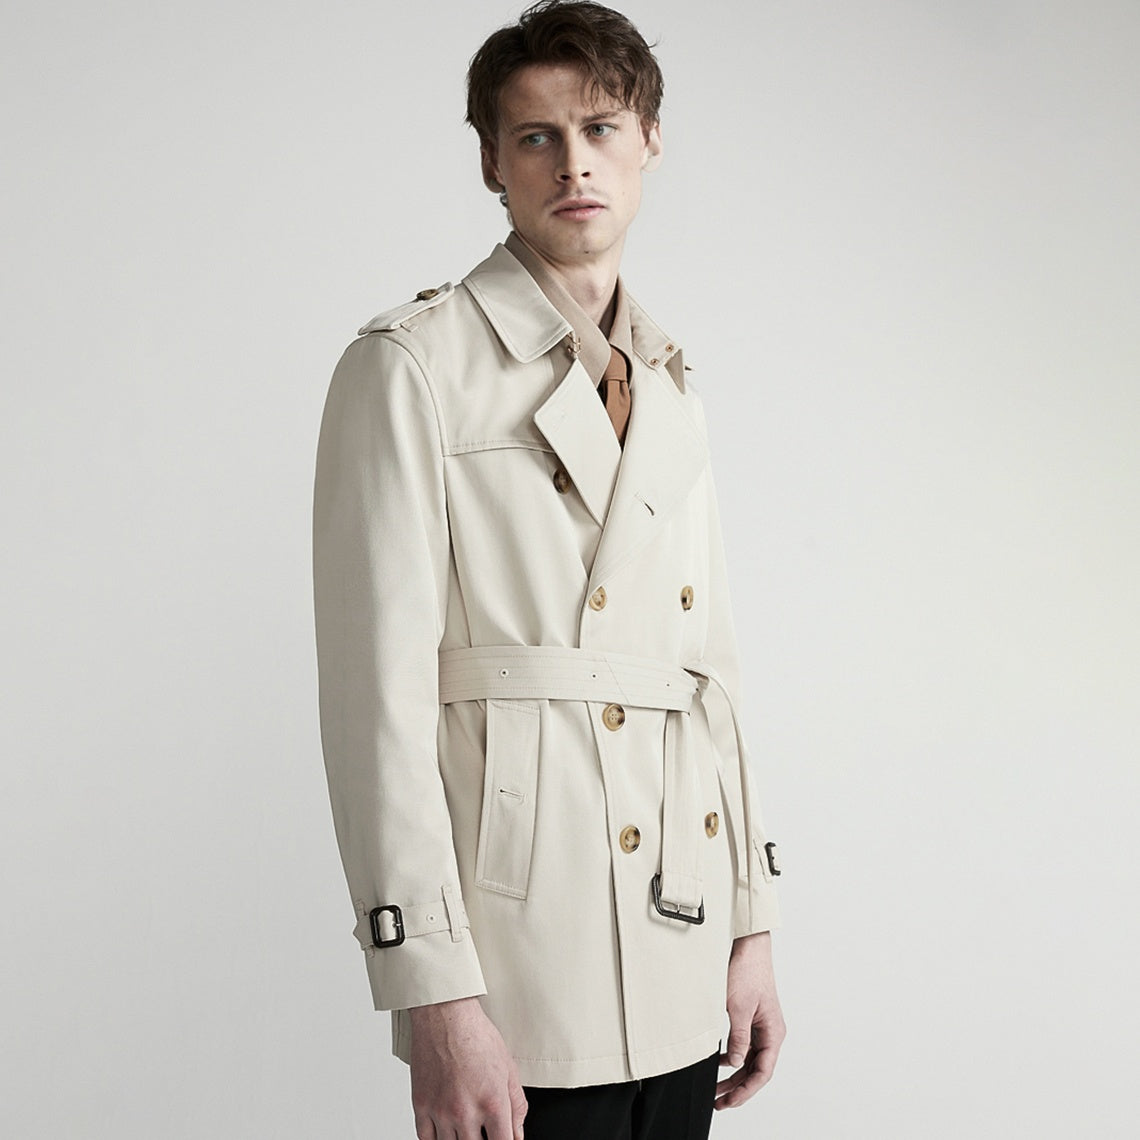 Men's Double Breasted Belted Trench Coat